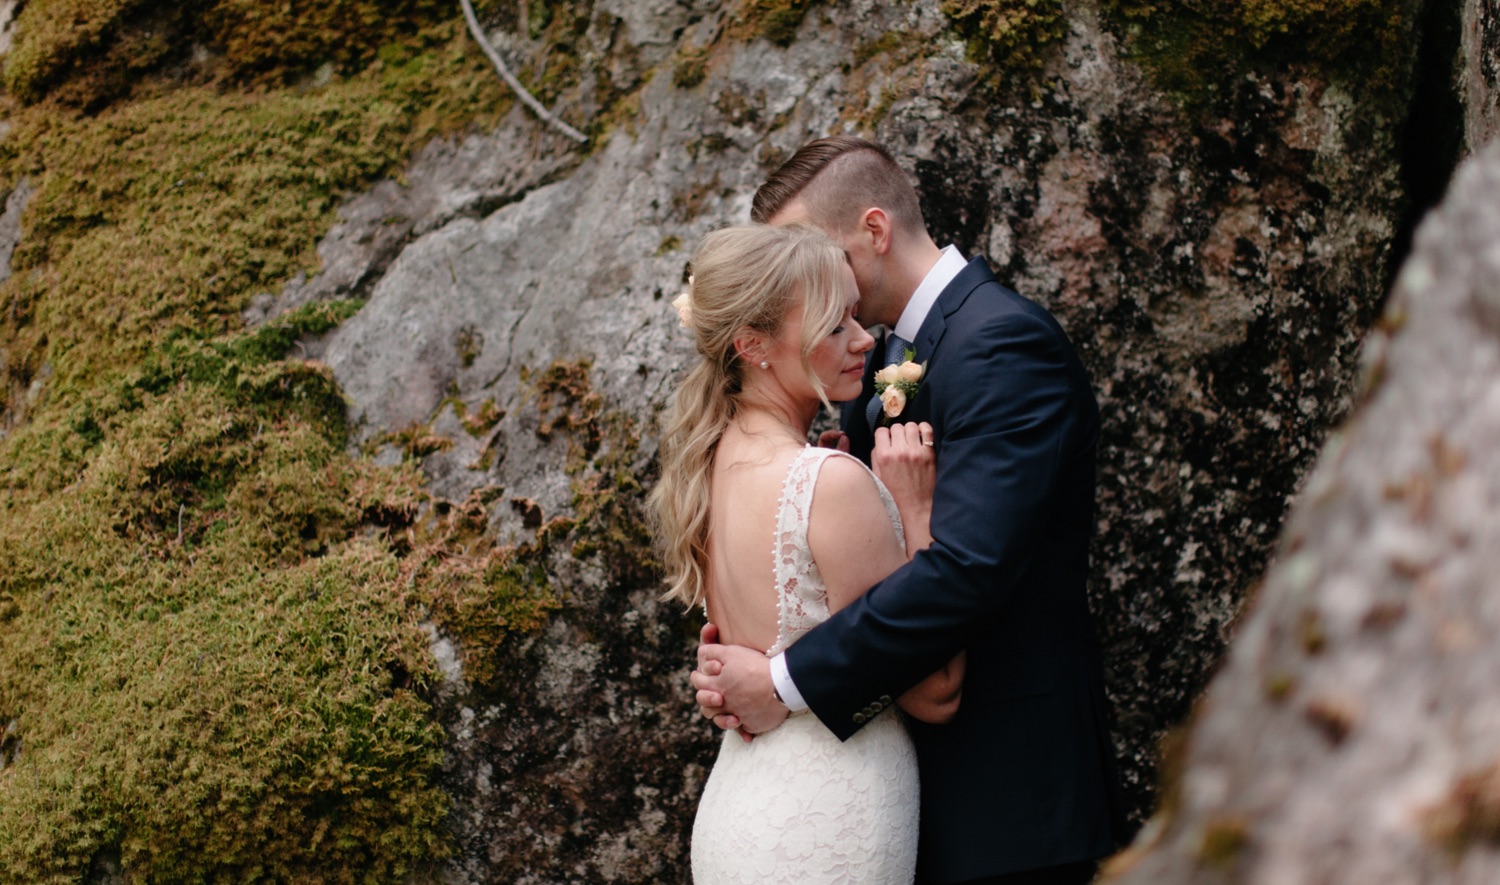 Moss covered rock and lichen backdrop for elopement portraits in the Canadian backcountry